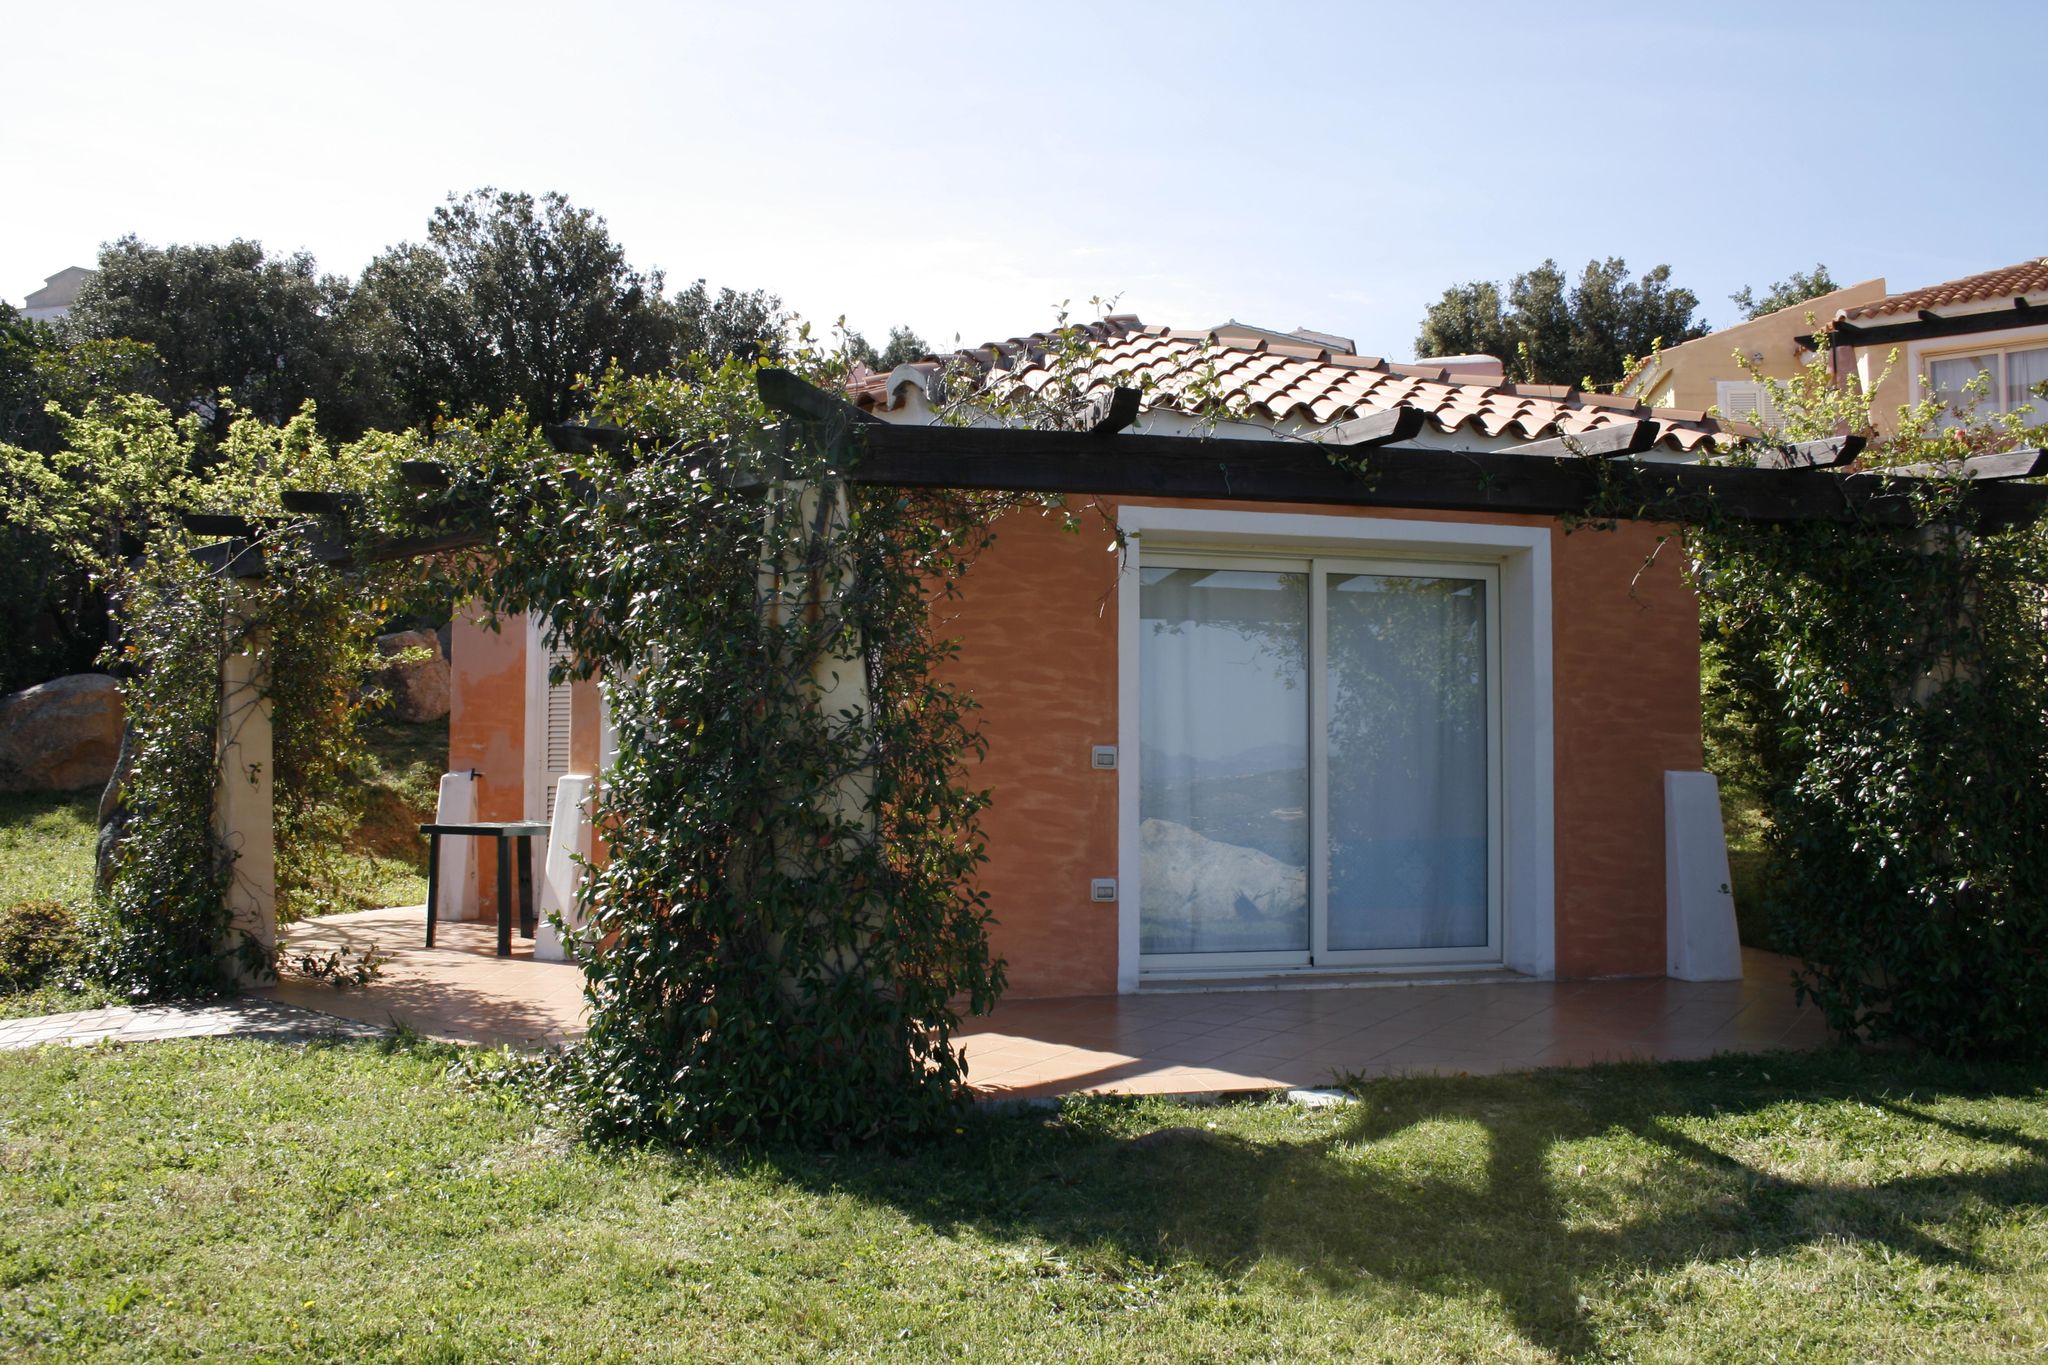 Detached villa with two bathrooms not far from the sea